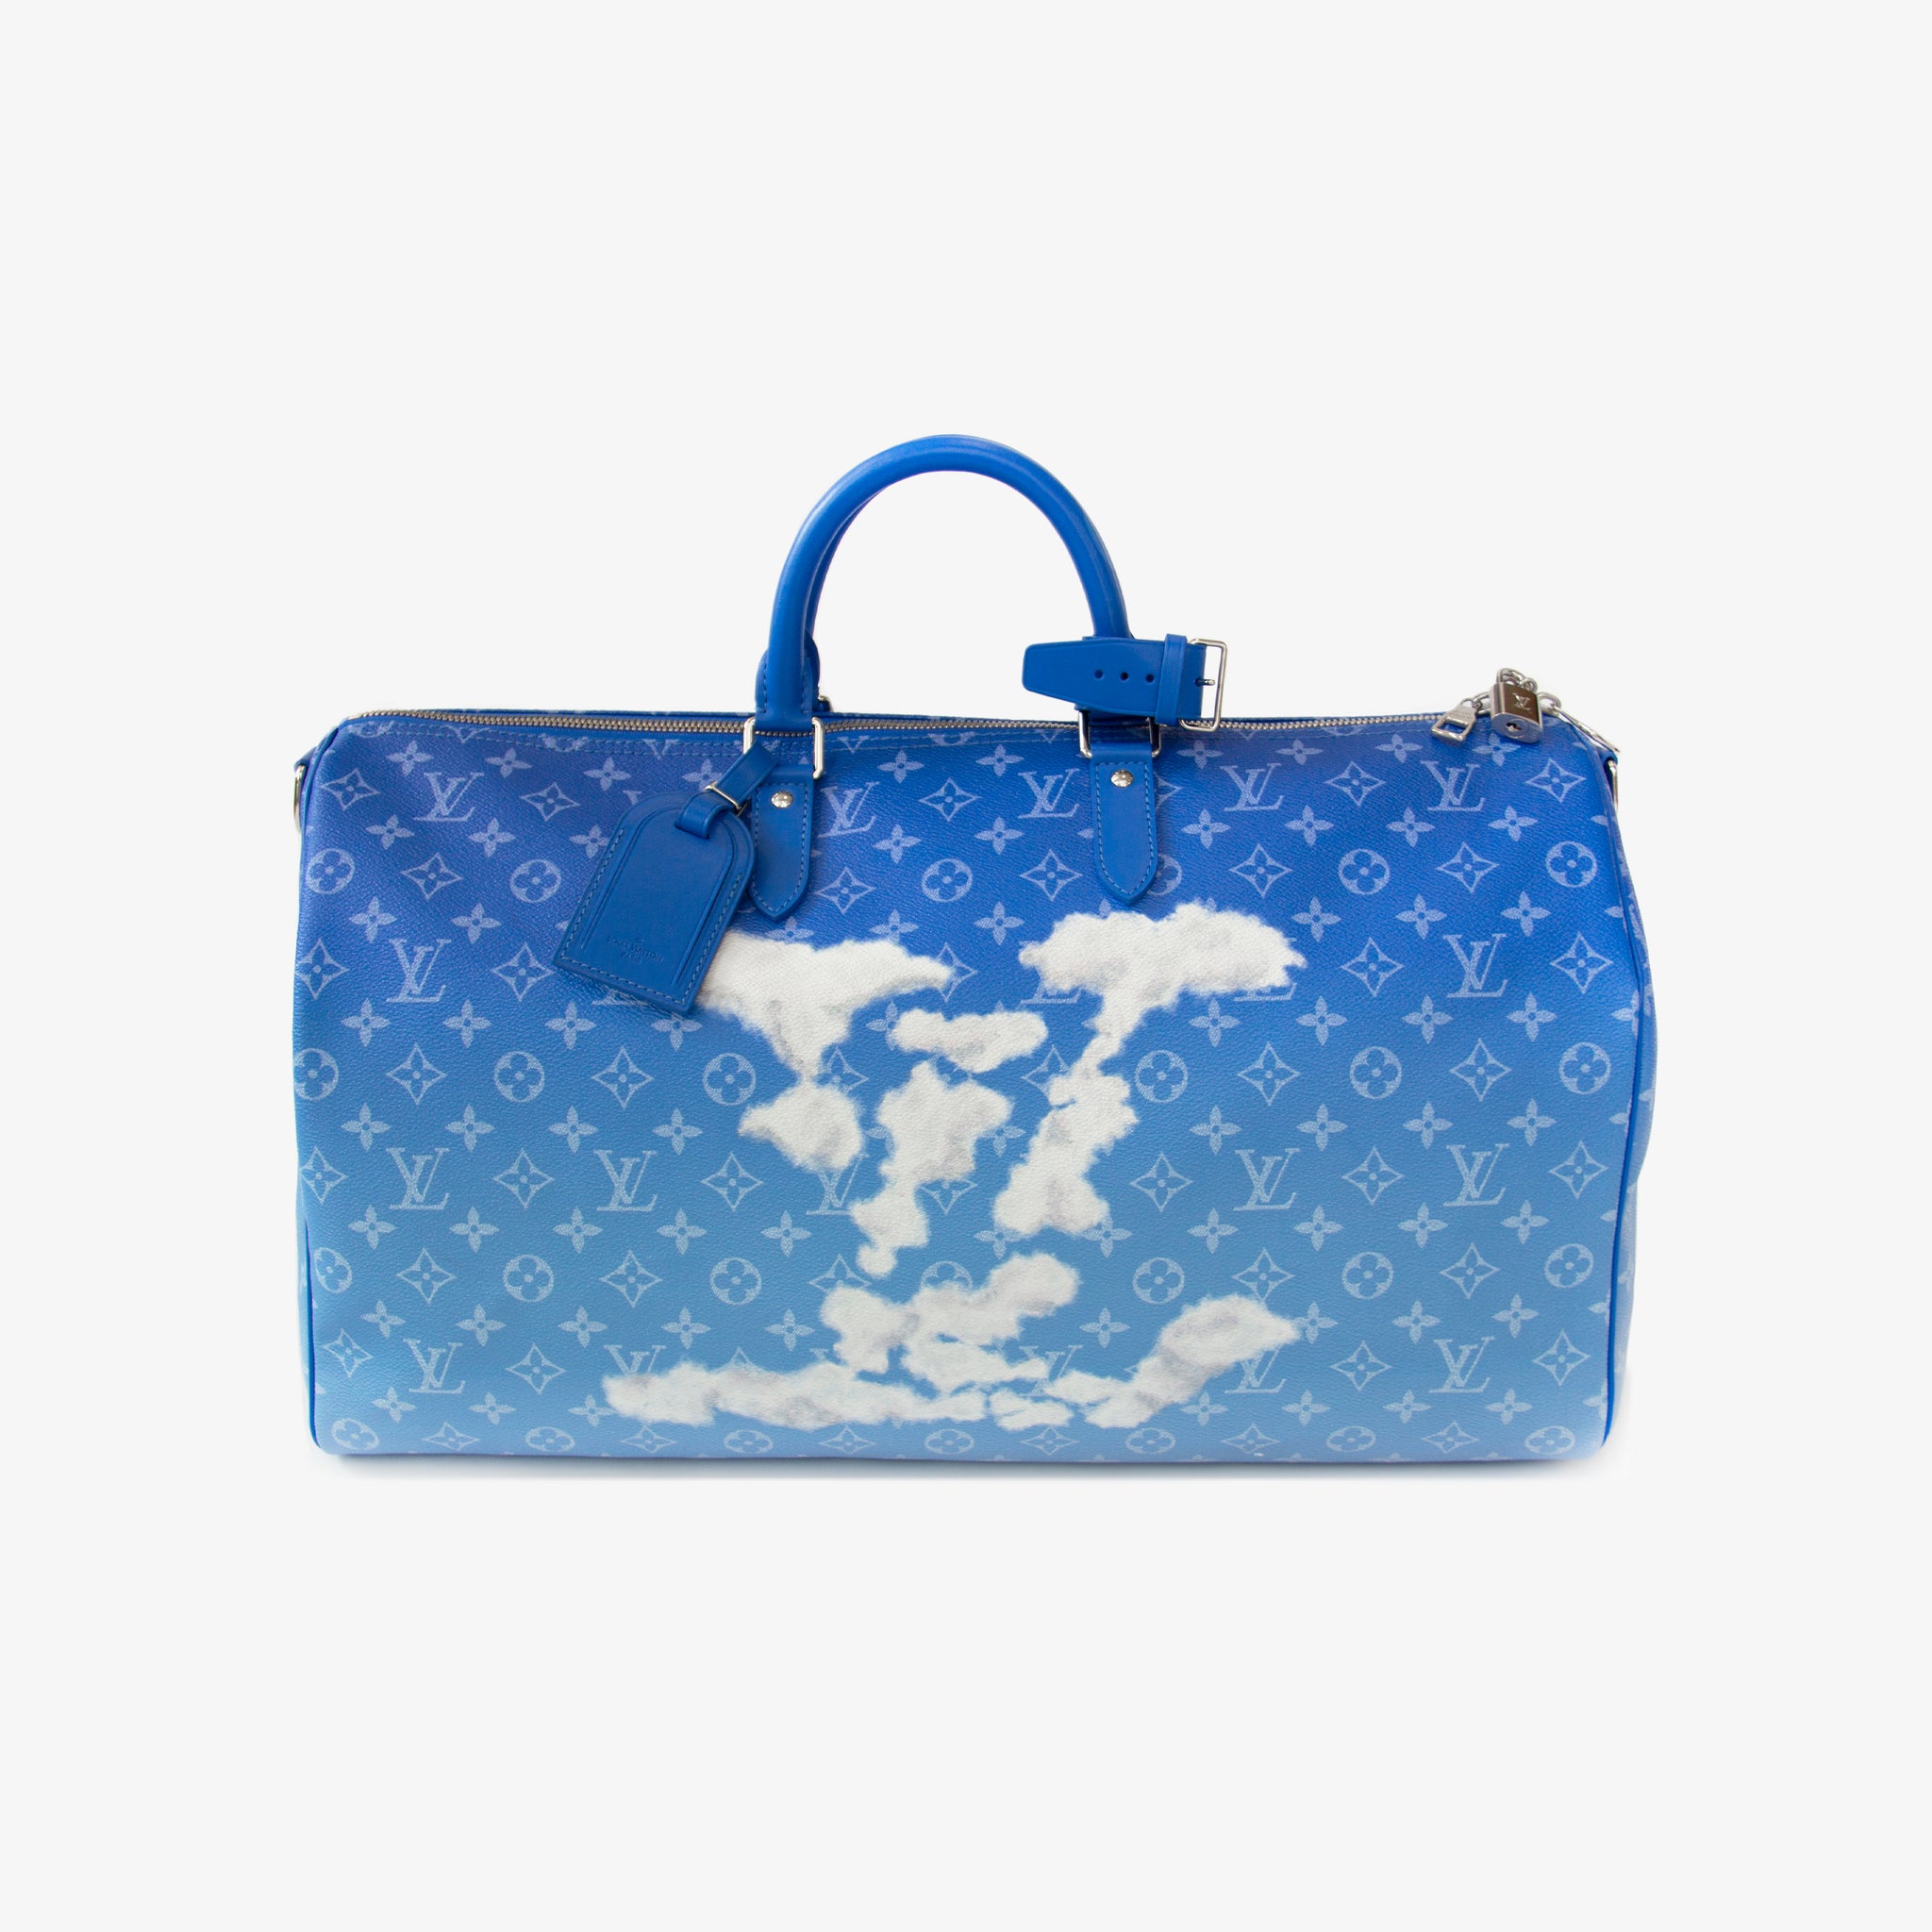 Keepall Bandouliere Bag Limited Edition Monogram Clouds 50